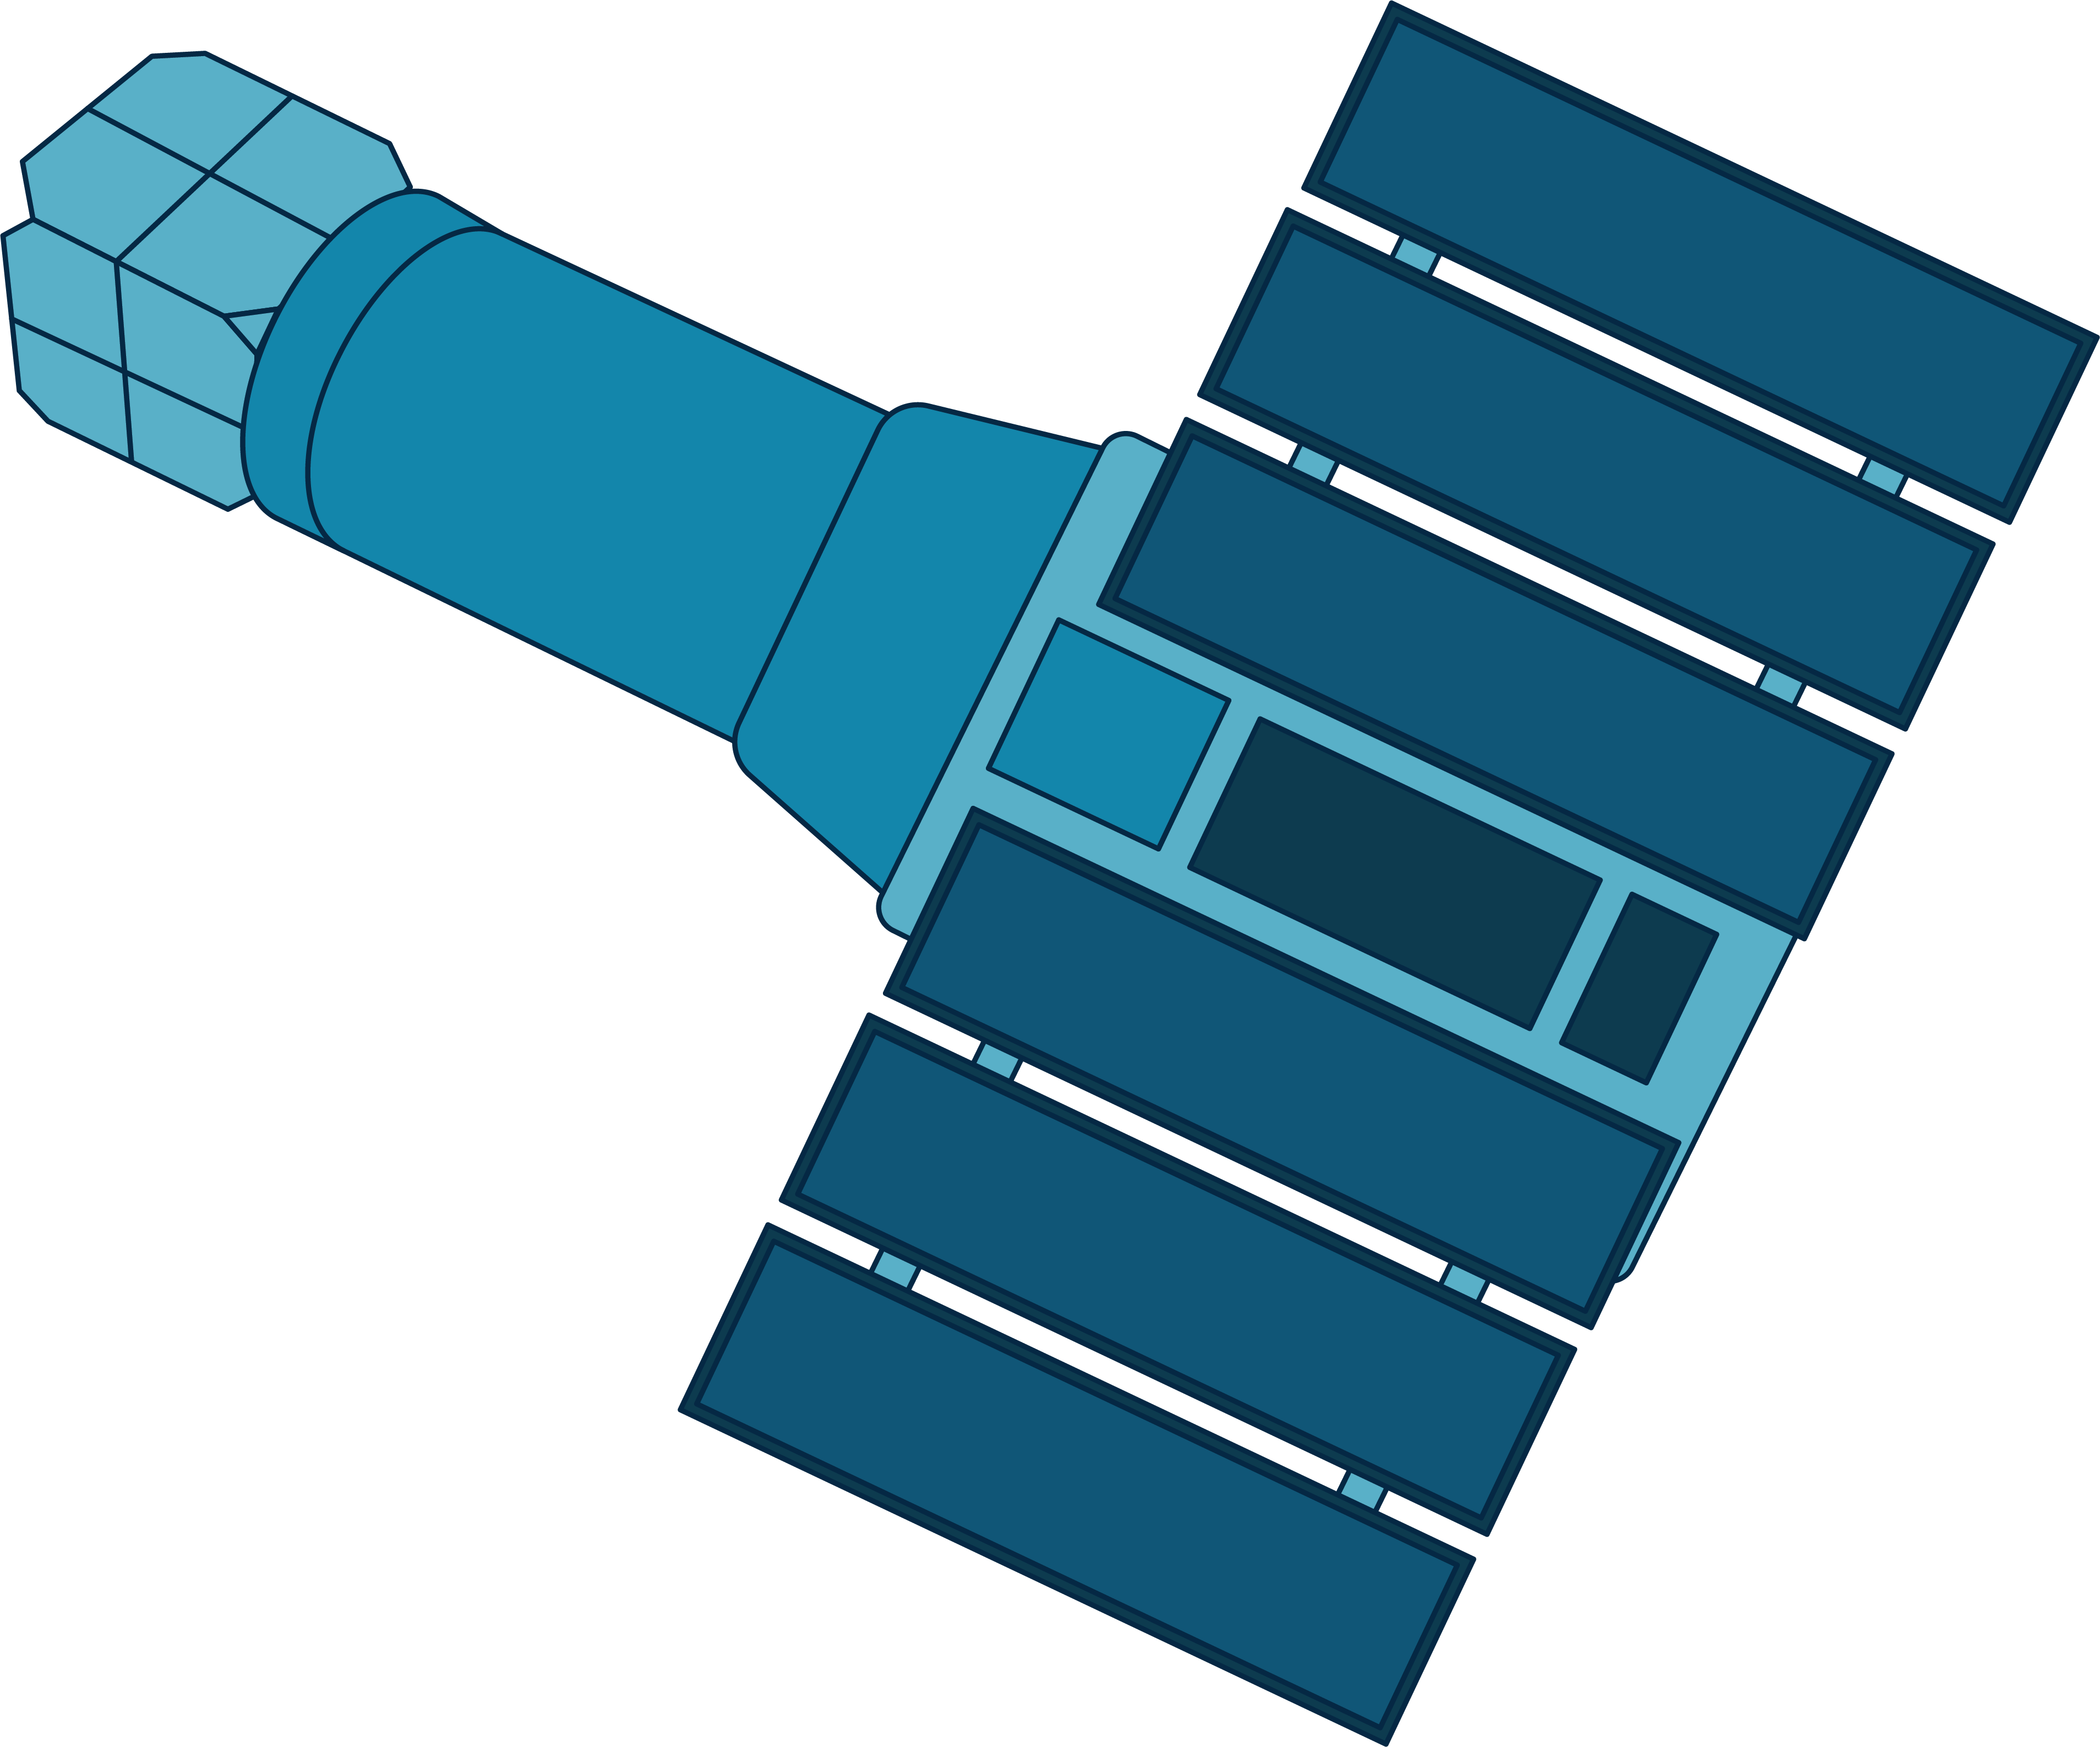 A graphic of ASCA is shown in light and dark shades of blue. The body of the spacecraft is bottle shaped, and an array of solar panels crosses on top of the widest part.